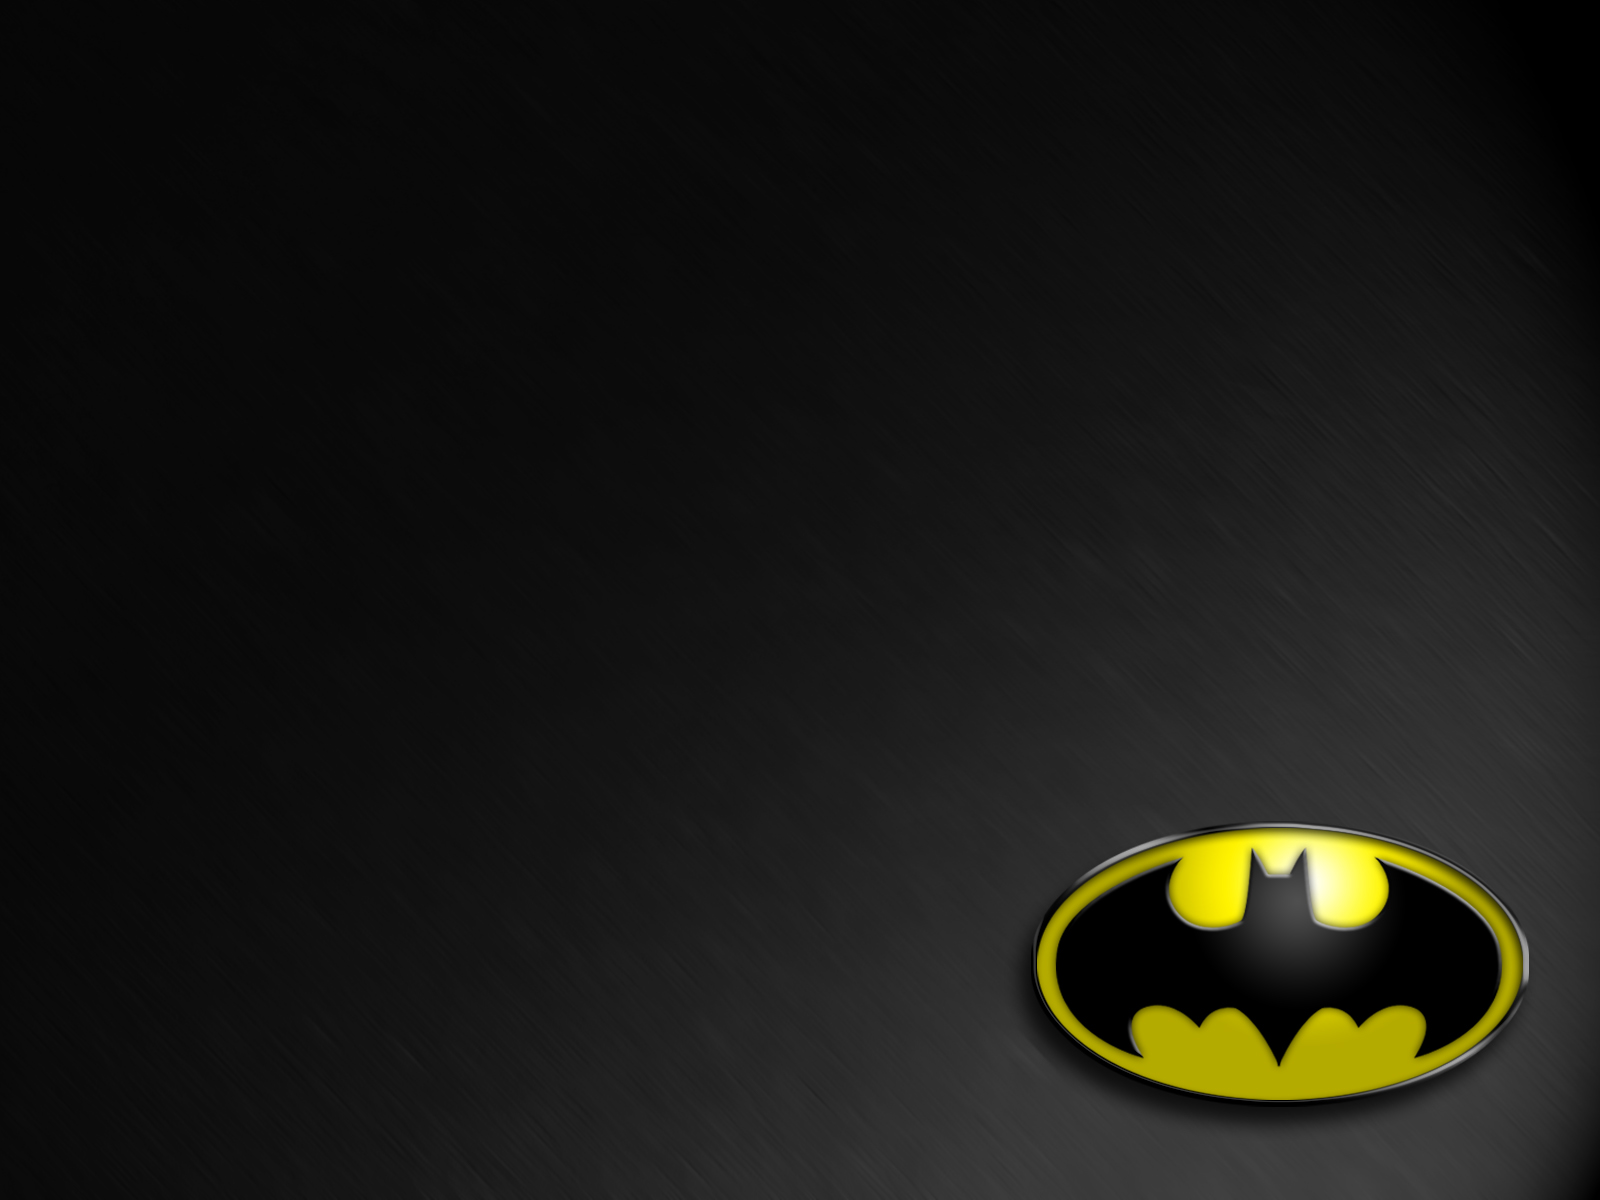 Batman Symbol Wallpaper Pictures Photos And Background